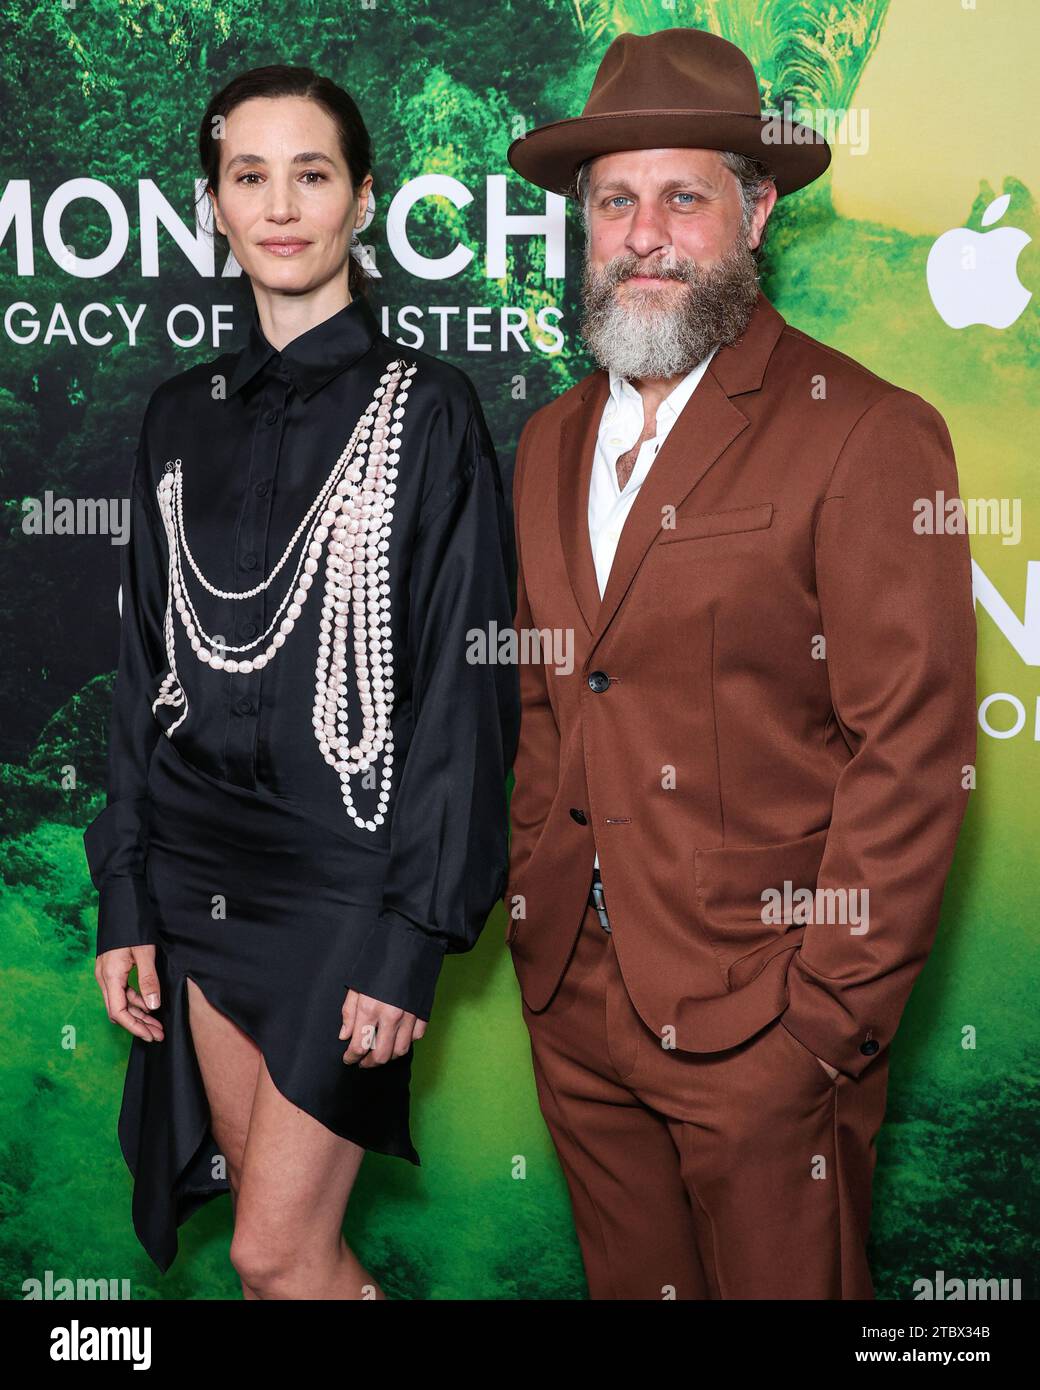 West Hollywood, United States. 08th Dec, 2023. WEST HOLLYWOOD, LOS ANGELES, CALIFORNIA, USA - DECEMBER 08: Elisa Lasowski and Joe Tippett arrive at the Los Angeles Photo Call Of Apple TV 's 'Monarch: Legacy Of Monsters' Season 1 held at The London West Hollywood at Beverly Hills on December 8, 2023 in West Hollywood, Los Angeles, California, United States. (Photo by Xavier Collin/Image Press Agency) Credit: Image Press Agency/Alamy Live News Stock Photo